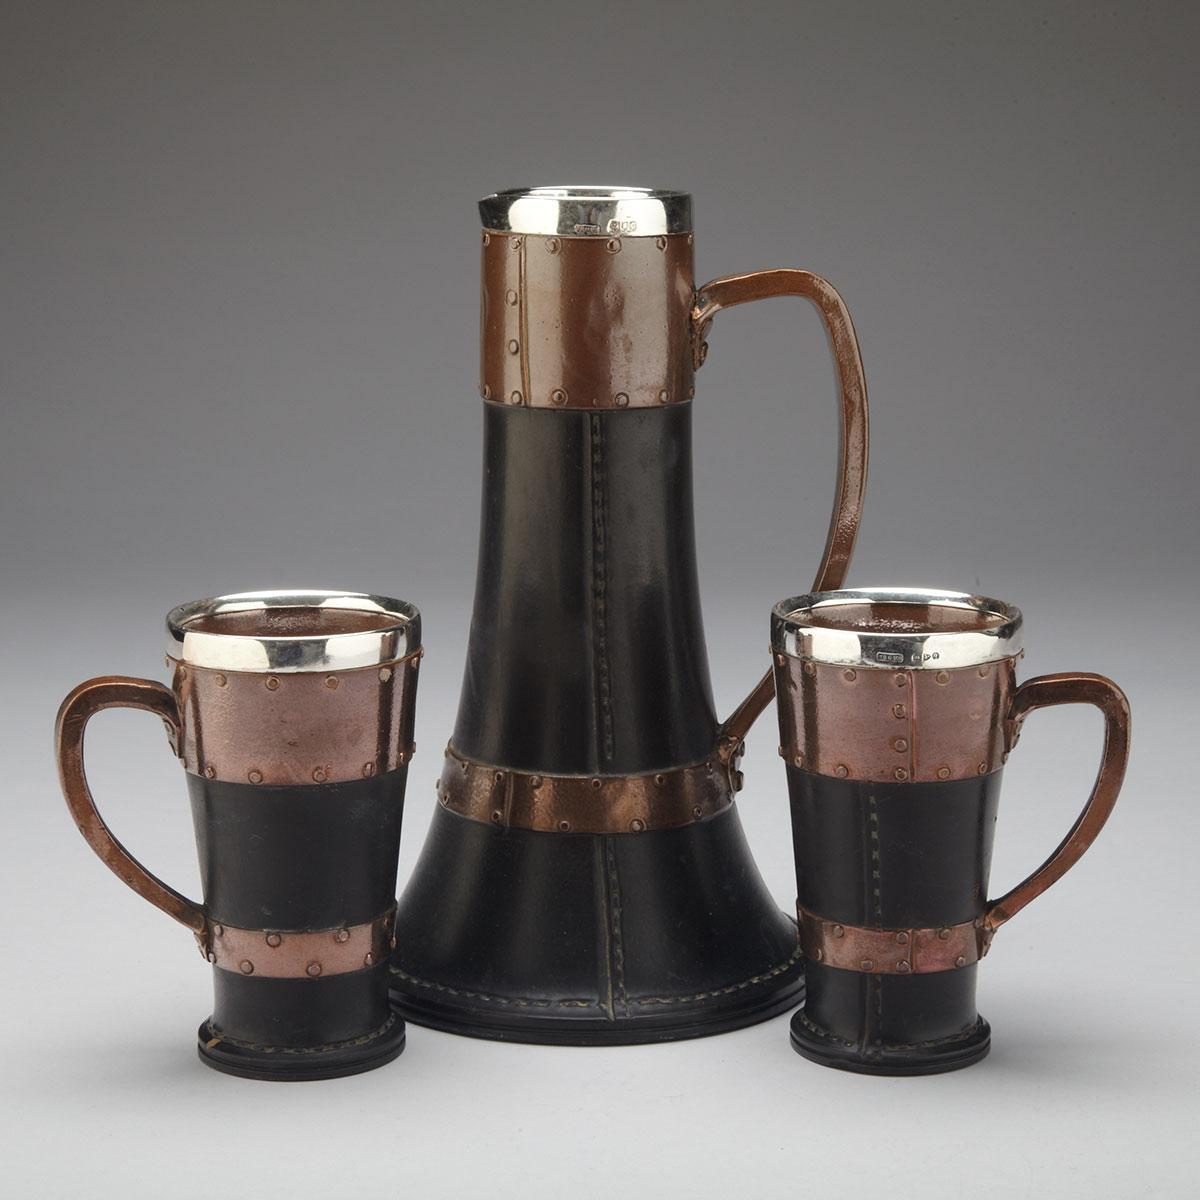 Doulton Lambeth ‘Silicon’ Simulated Leather and Copper Jug and a Pair of Mugs, c.1898-99